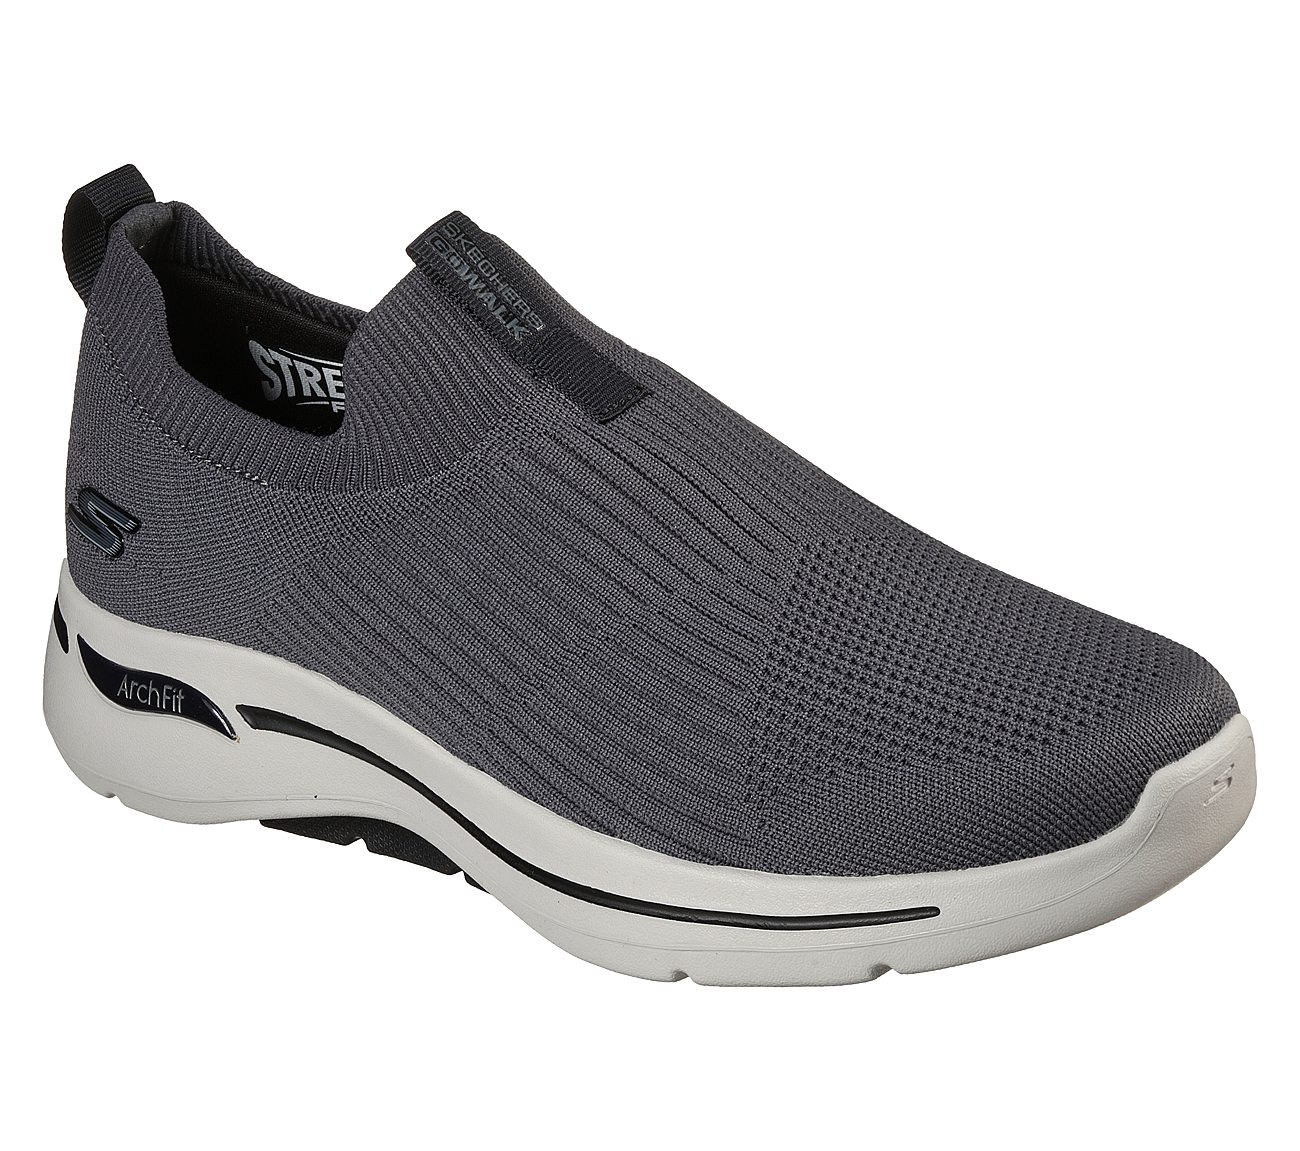 GO WALK ARCH FIT - ICONIC, CHARCOAL/BLACK Footwear Lateral View